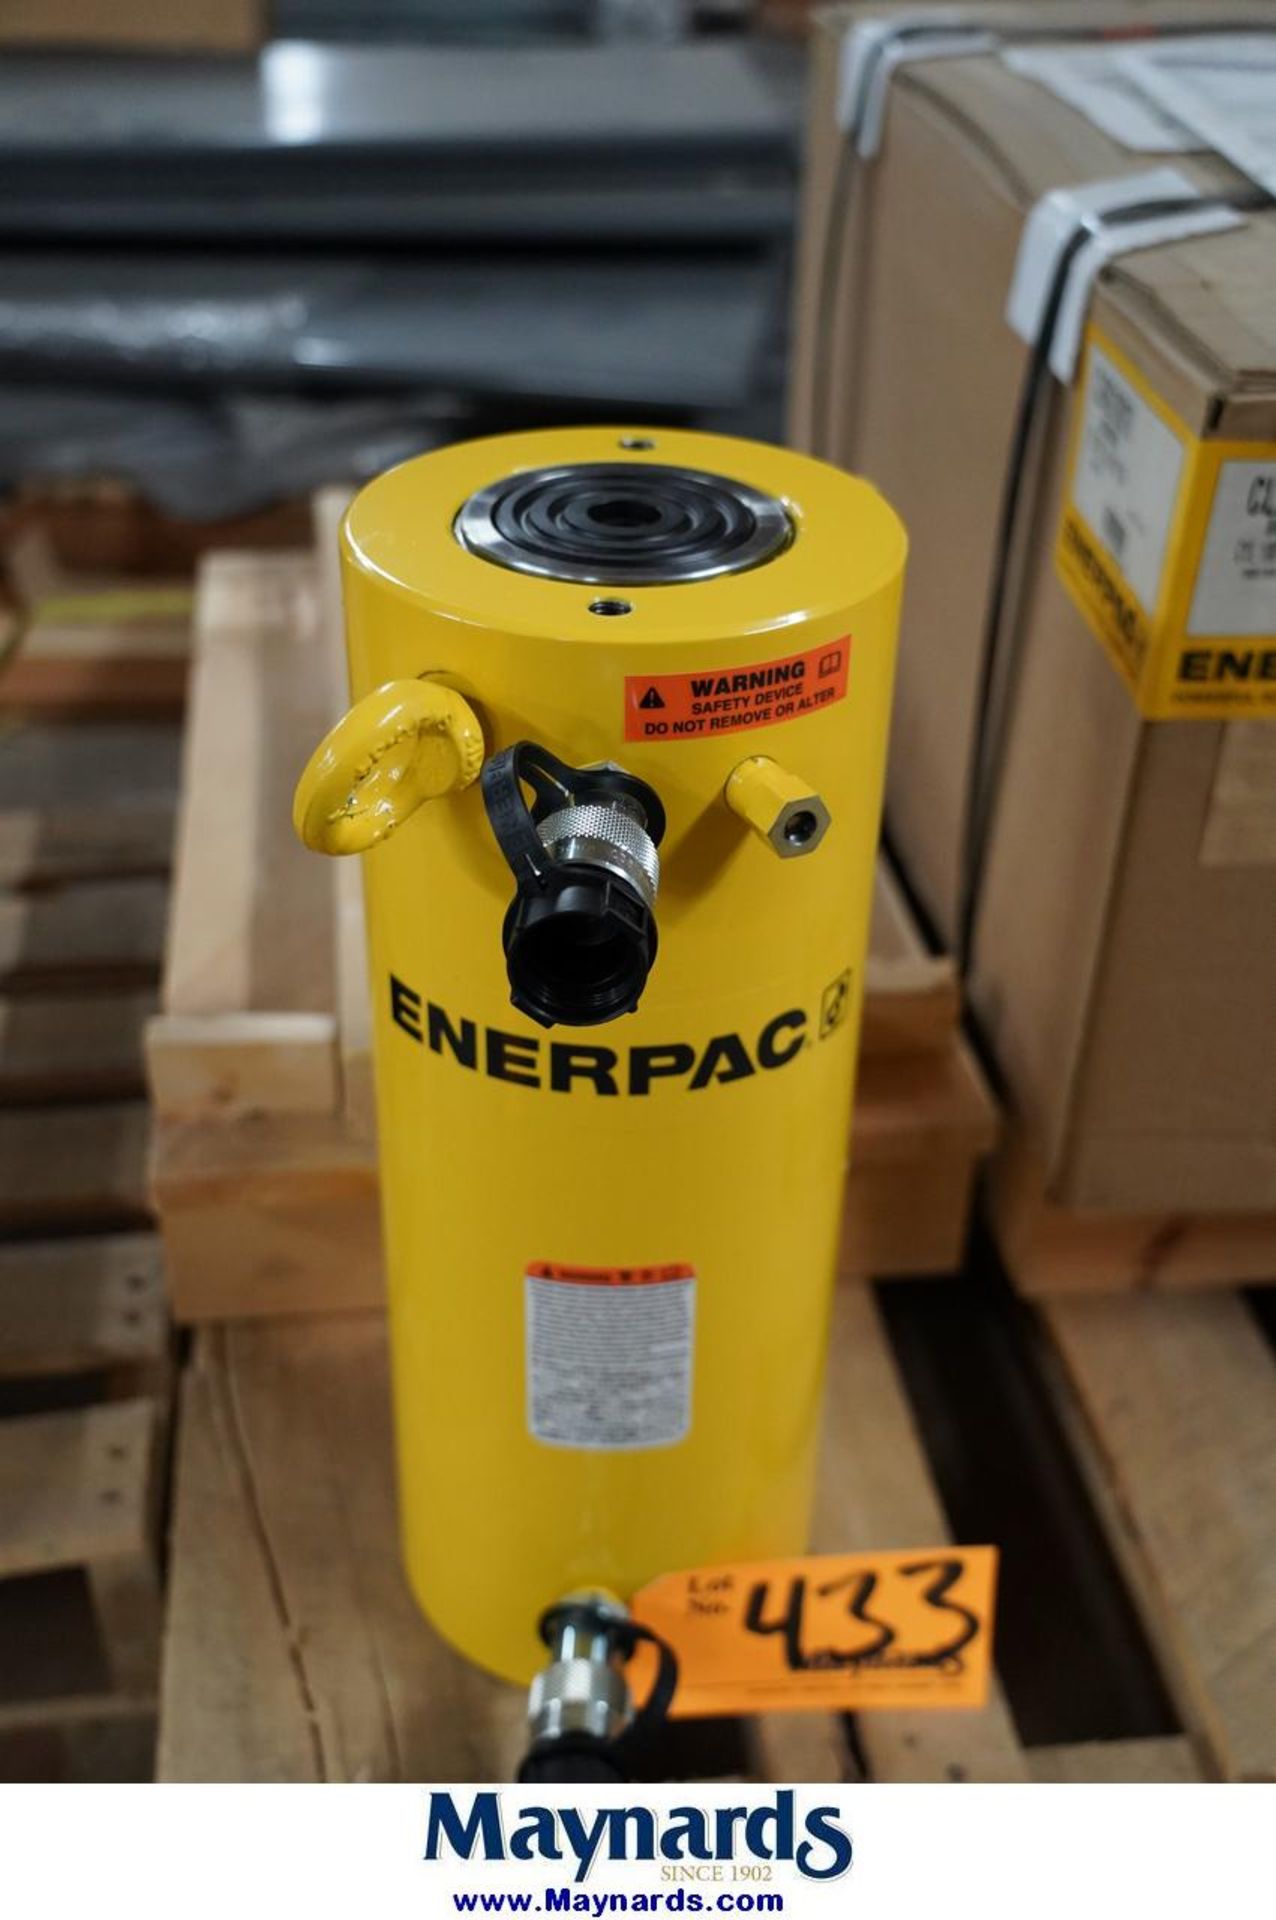 Enerpac CLRG10012 100 Ton Hydraulic Cylinder - Double Acting - High Tonnage - Image 2 of 4